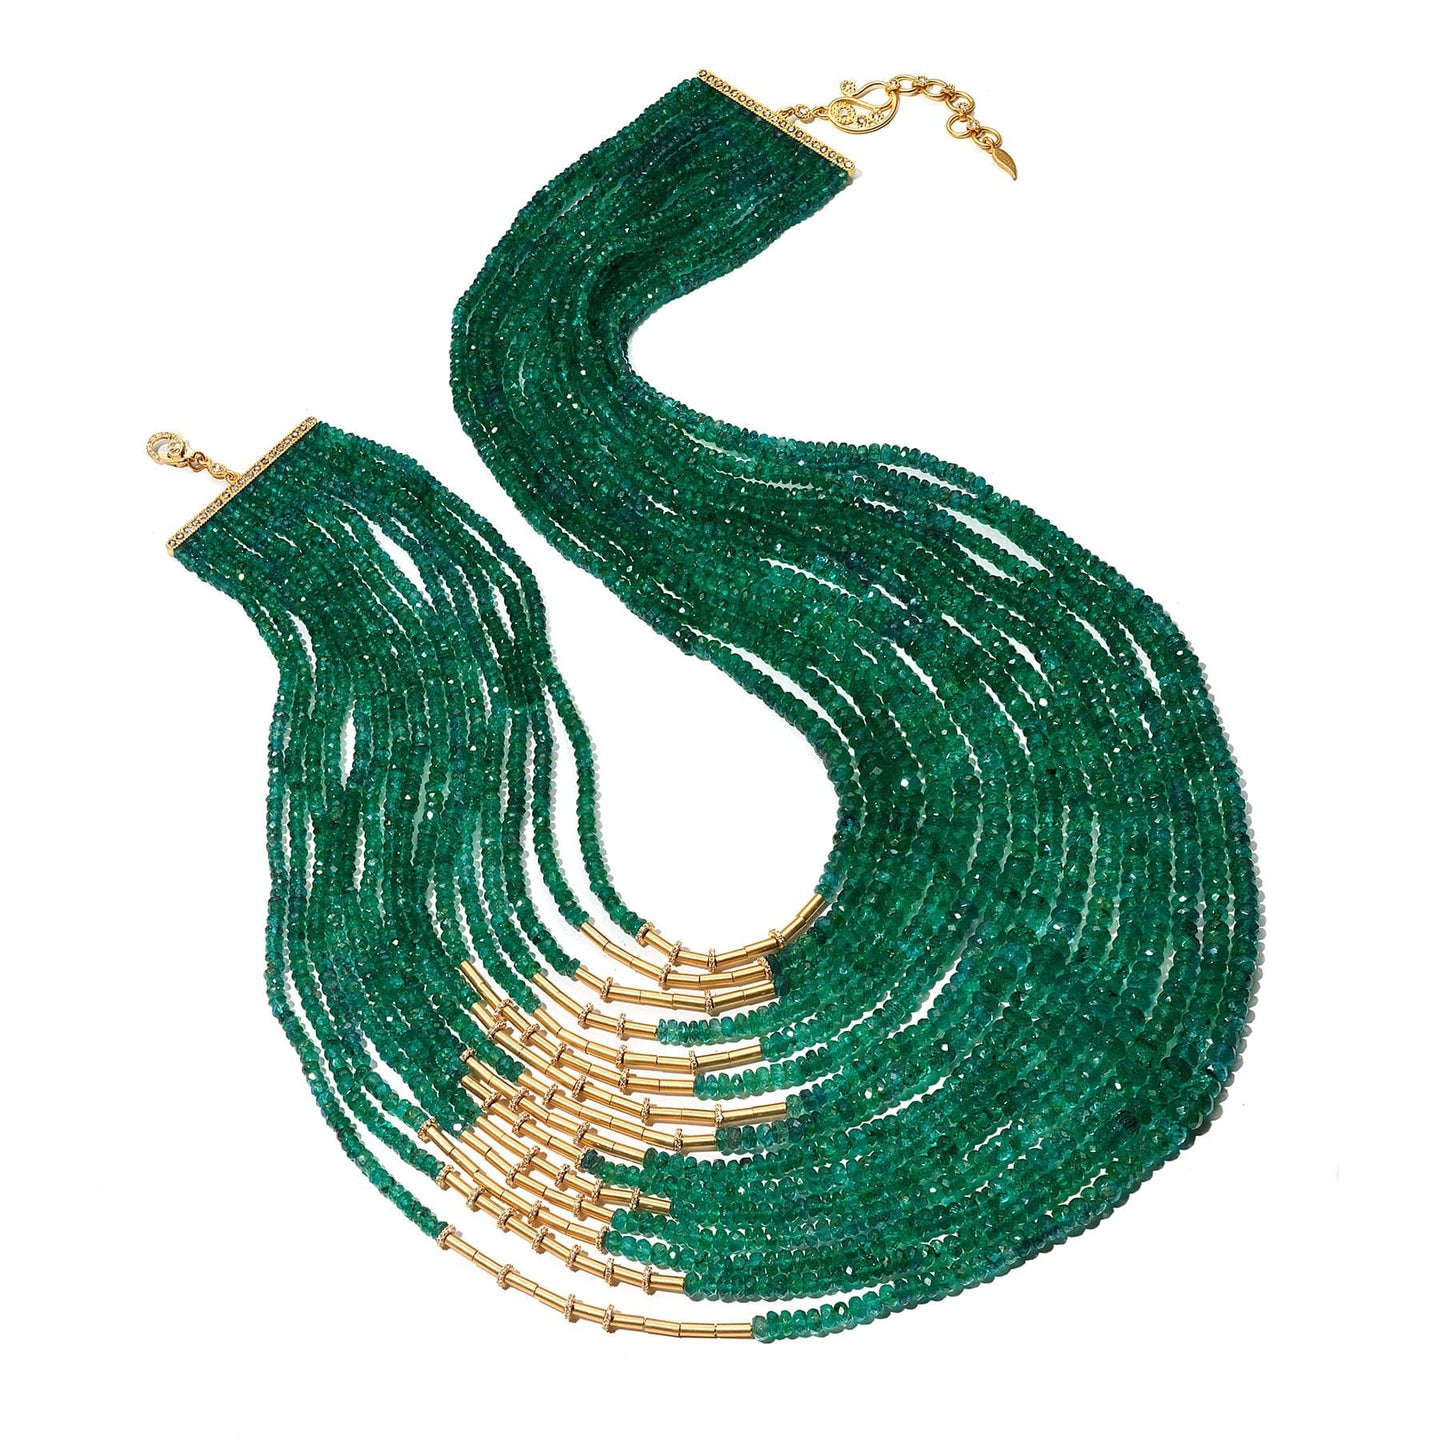 Affinity 20K Emerald Twist Necklace - Coomi